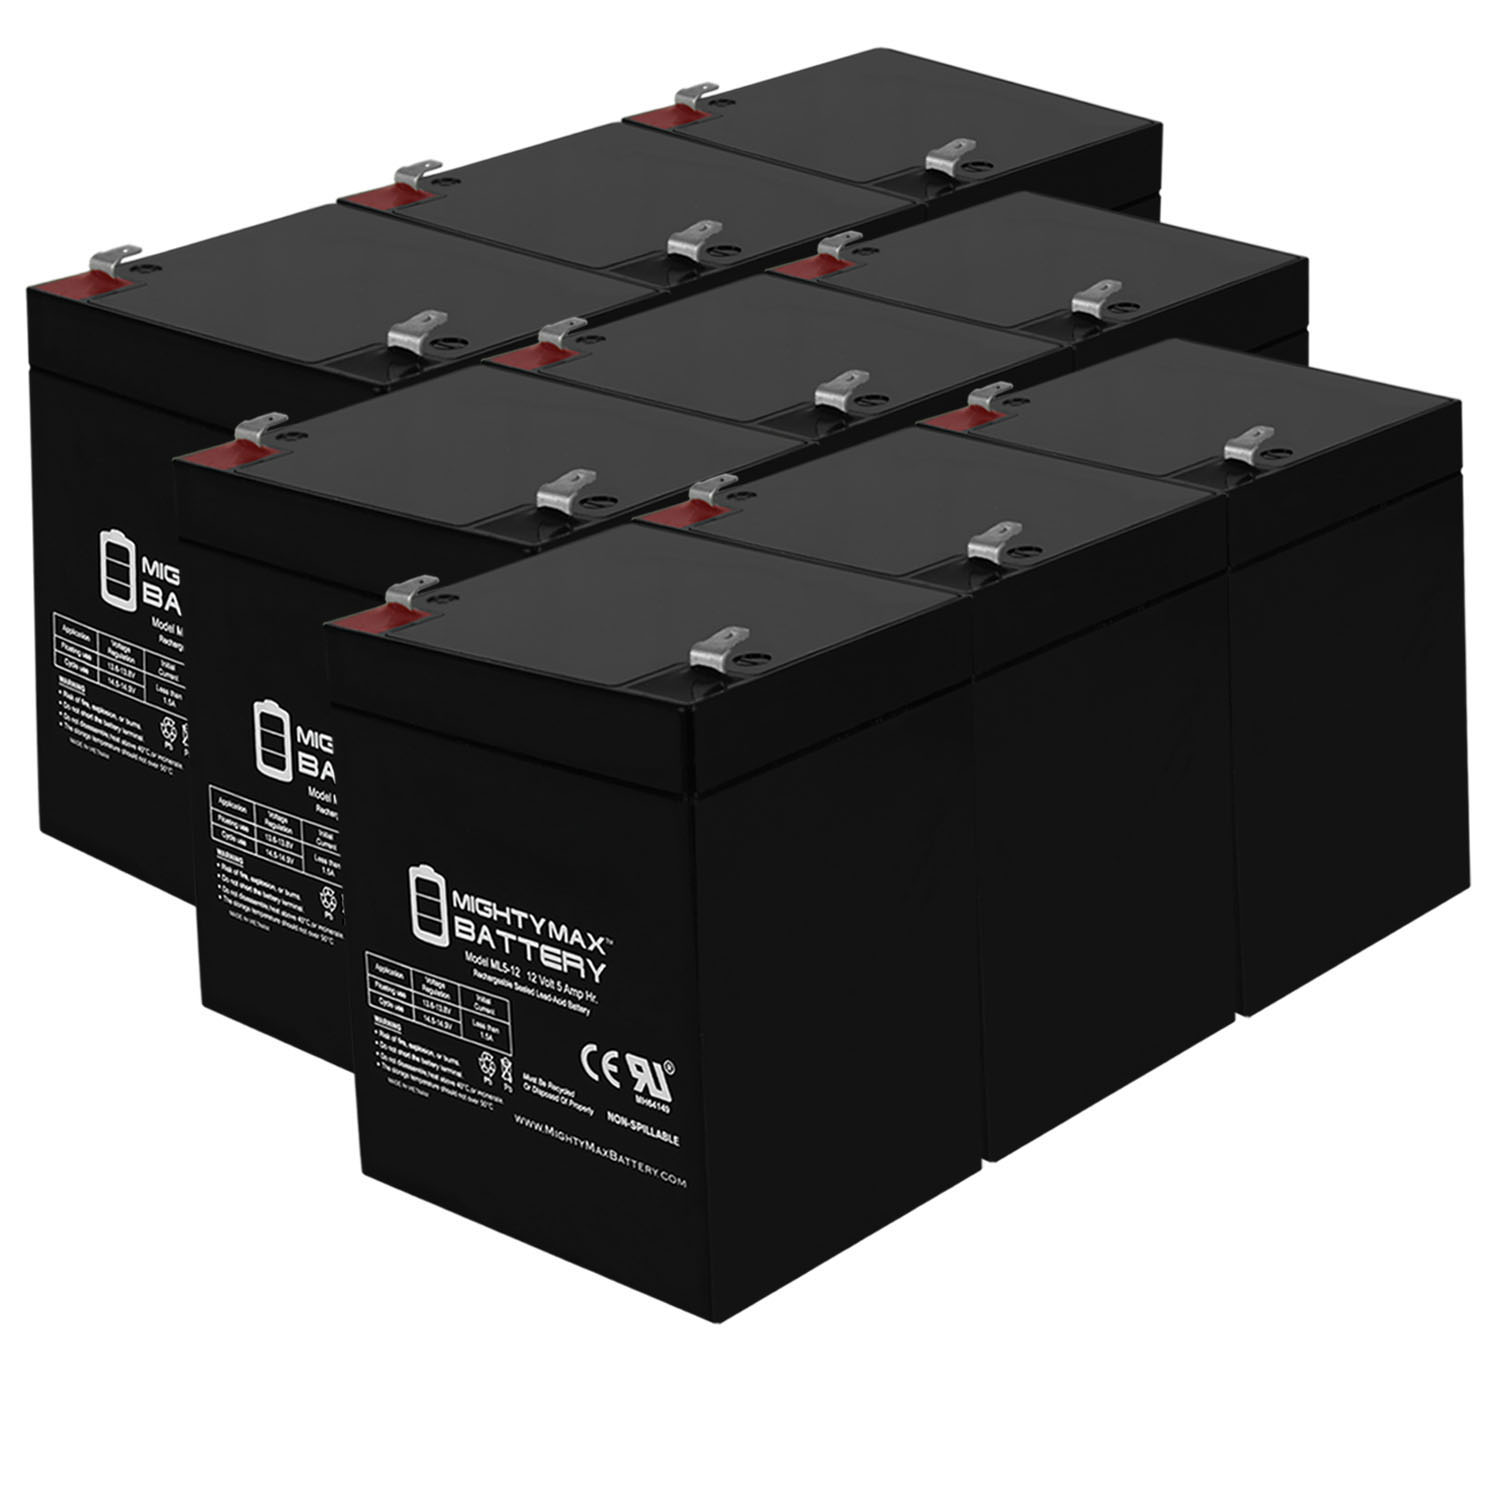 12V 5AH SLA Battery Replaces Emad Skateboards Pavement PP150 - 9 Pack